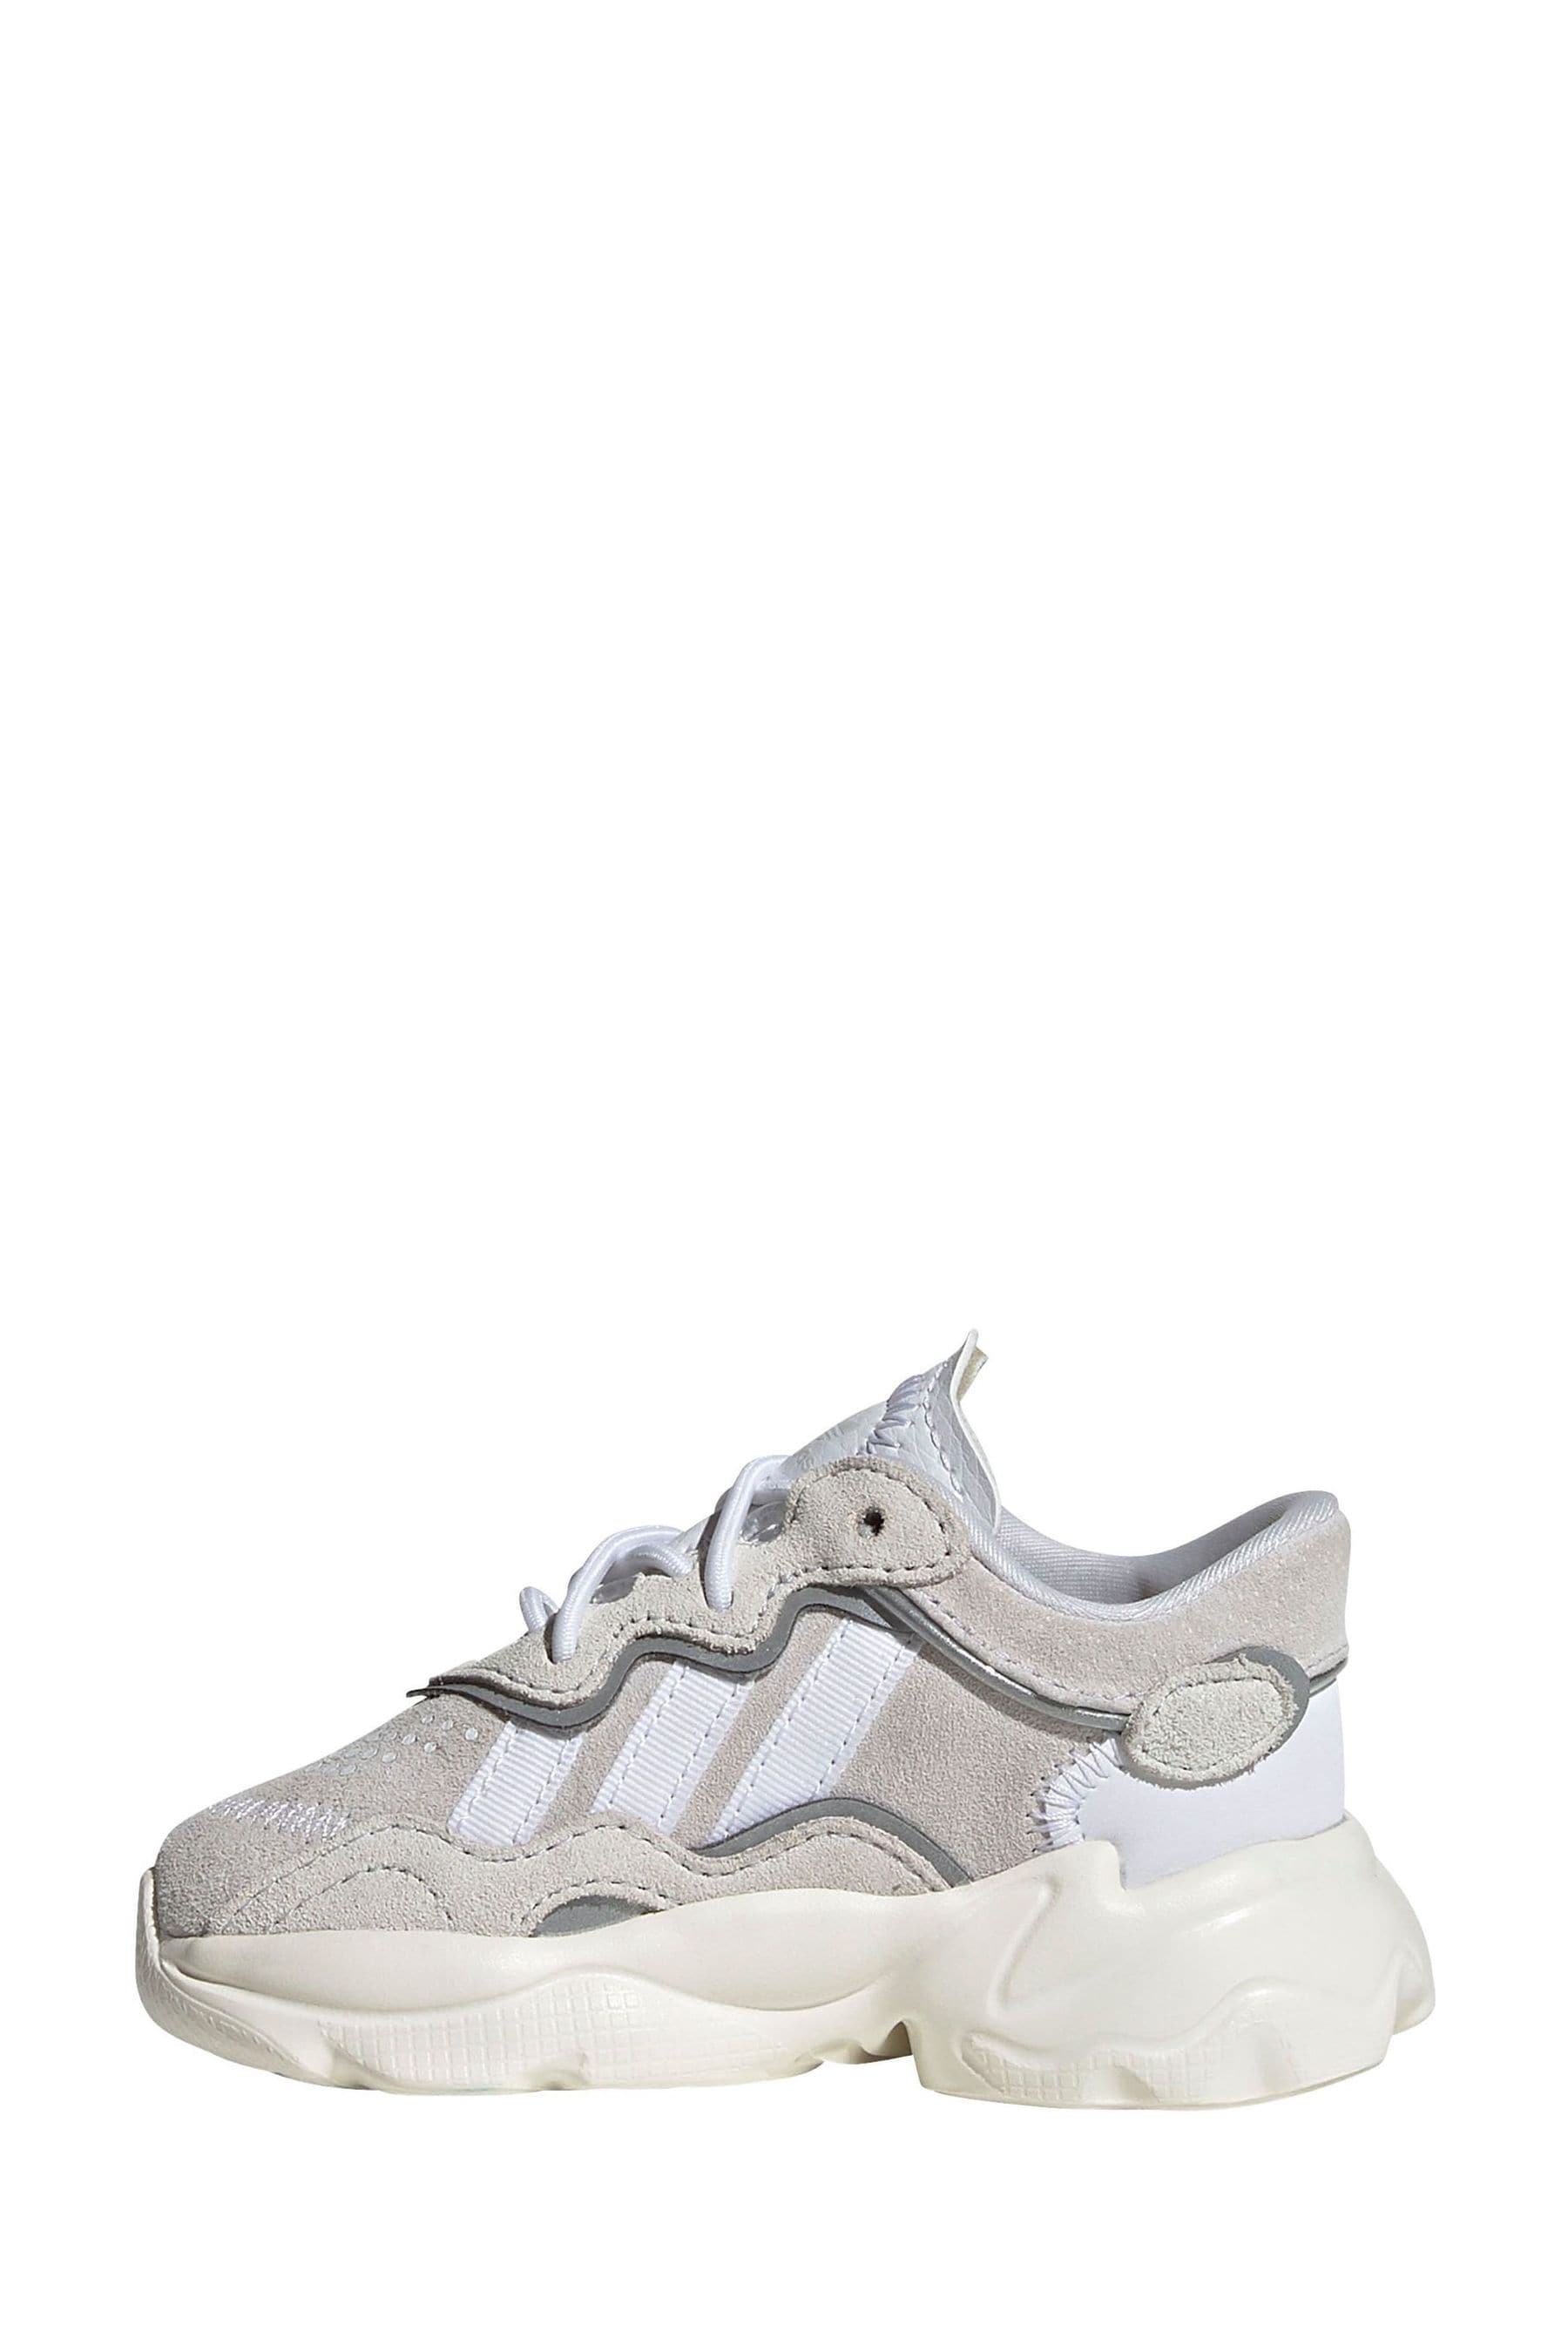 Buy adidas Originals Ozweego Infant Trainers from the Next UK online shop